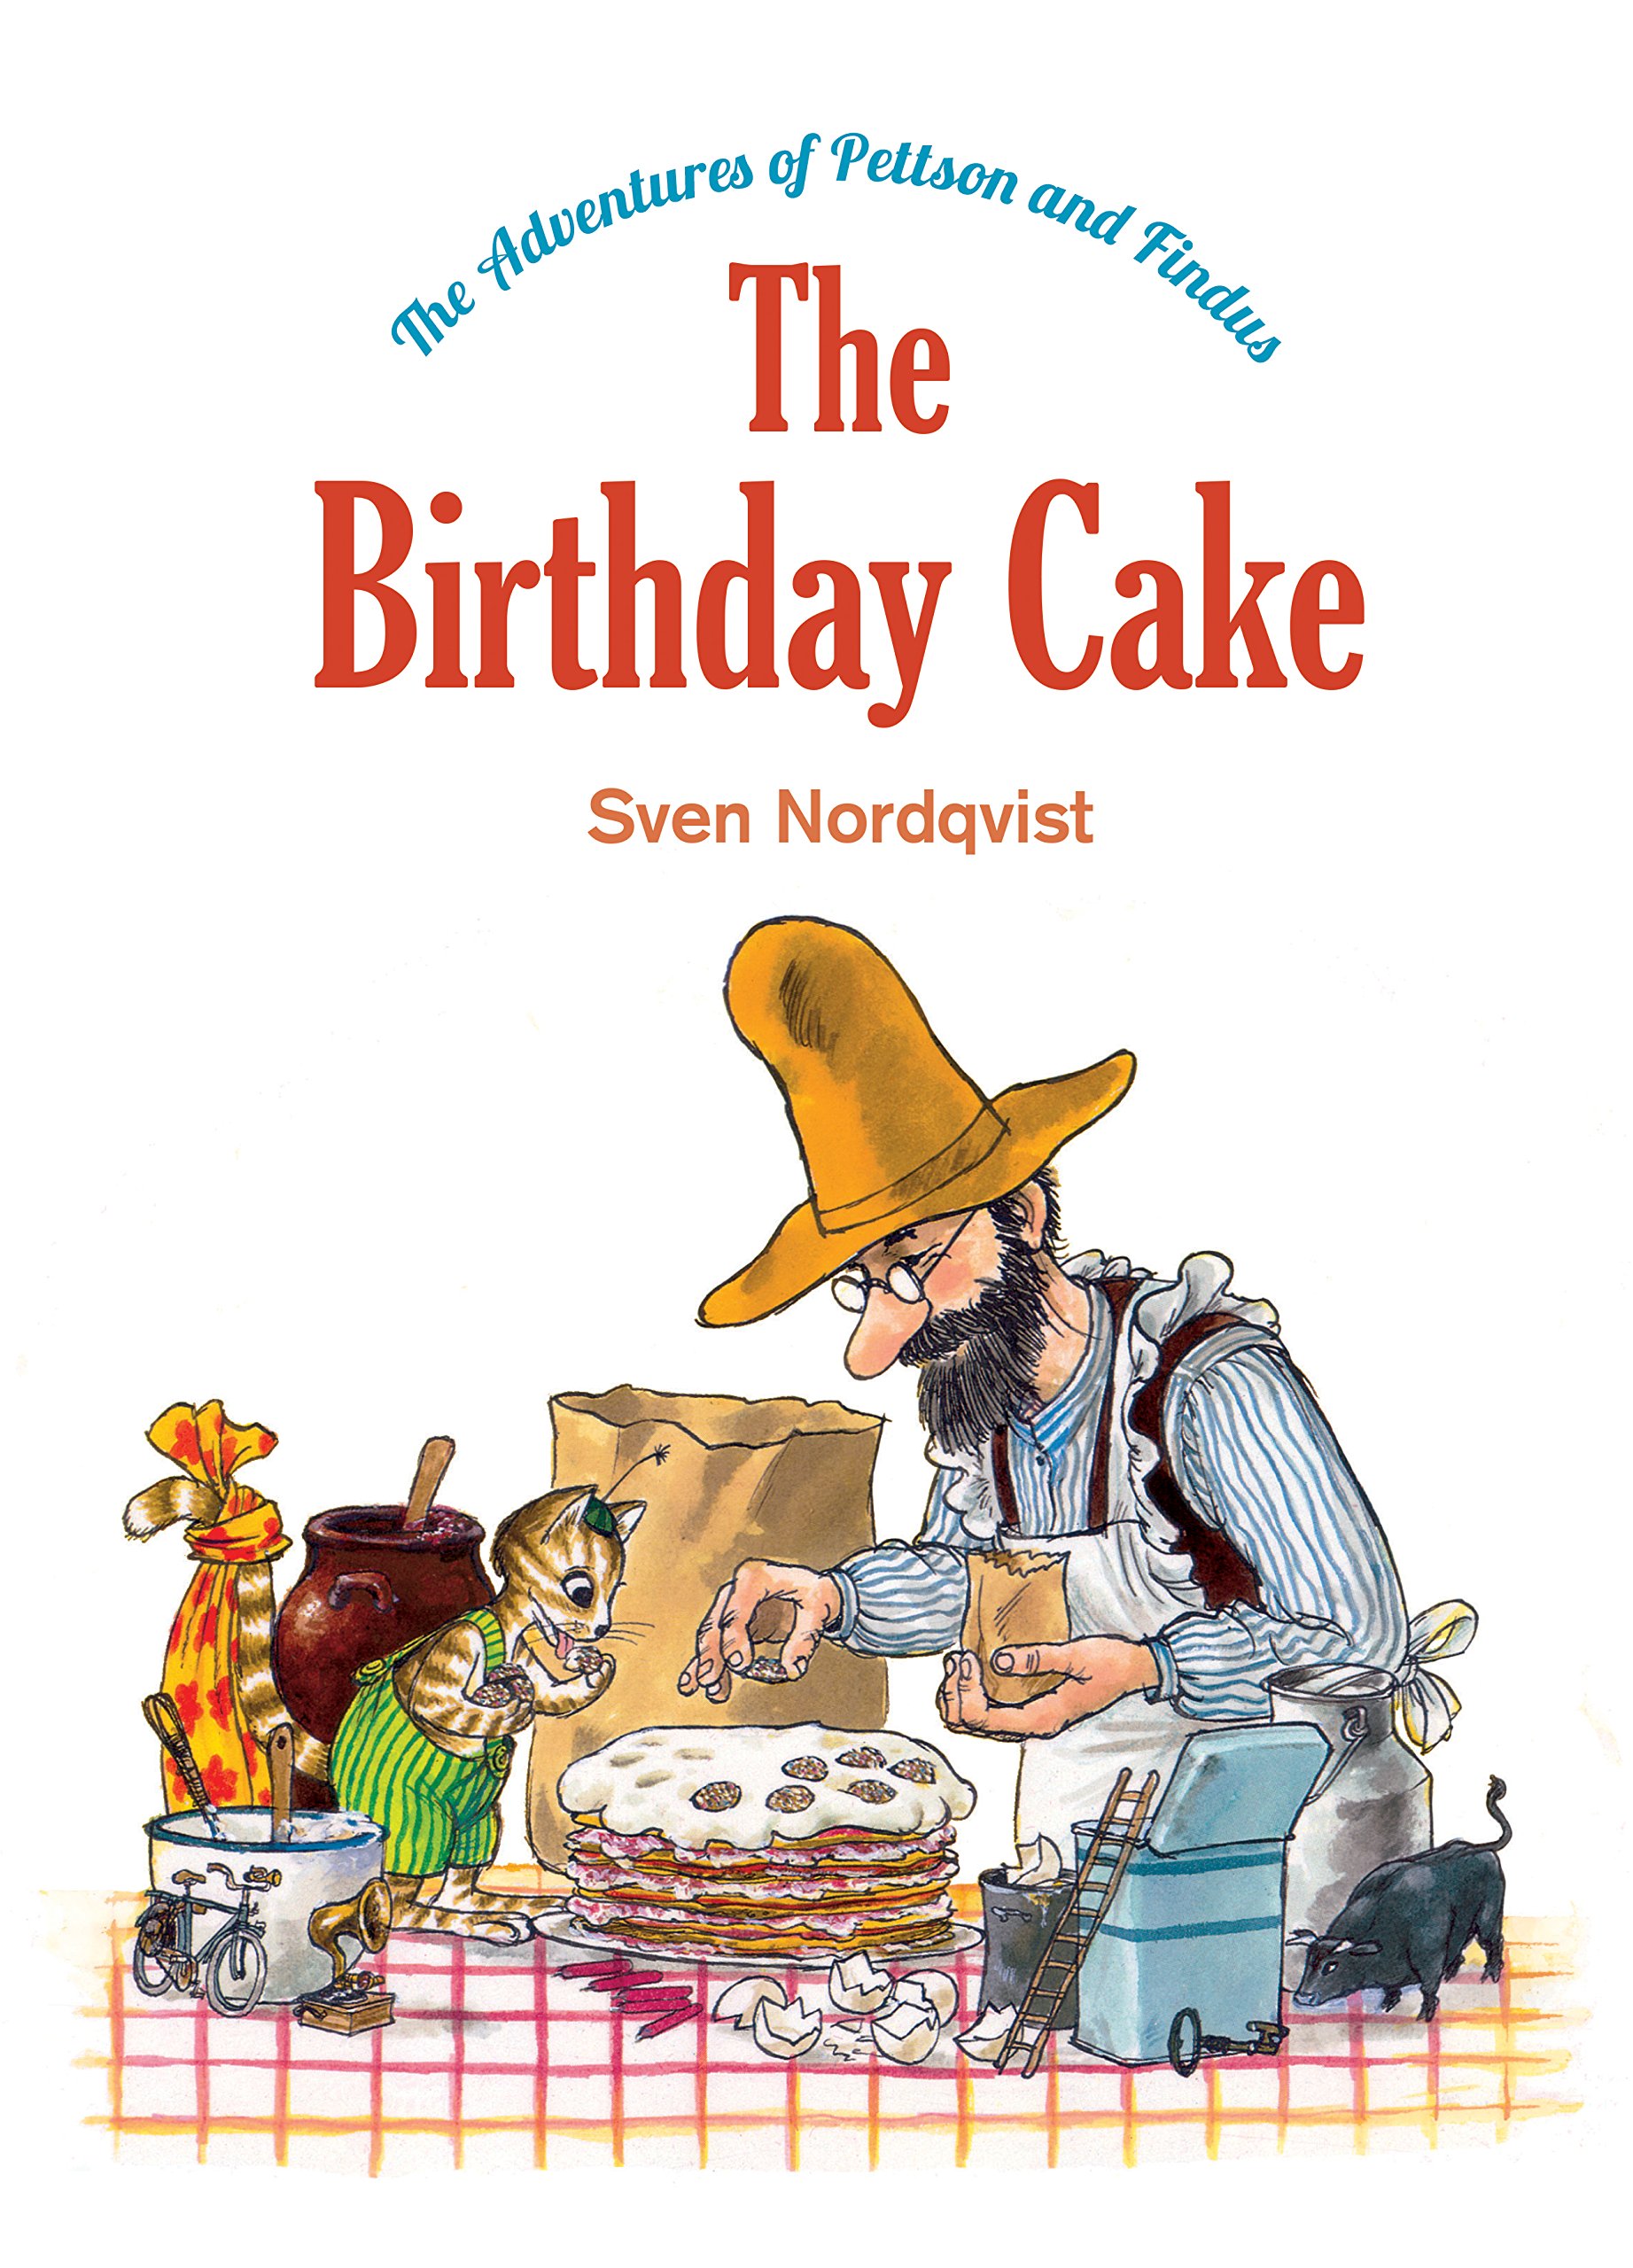 BirthdayCake Librarian Preview: Sourcebooks, National Geographic Kids, Quirk Books, Sterling, NorthSouth, and Running Press Kids (Spring 2015)